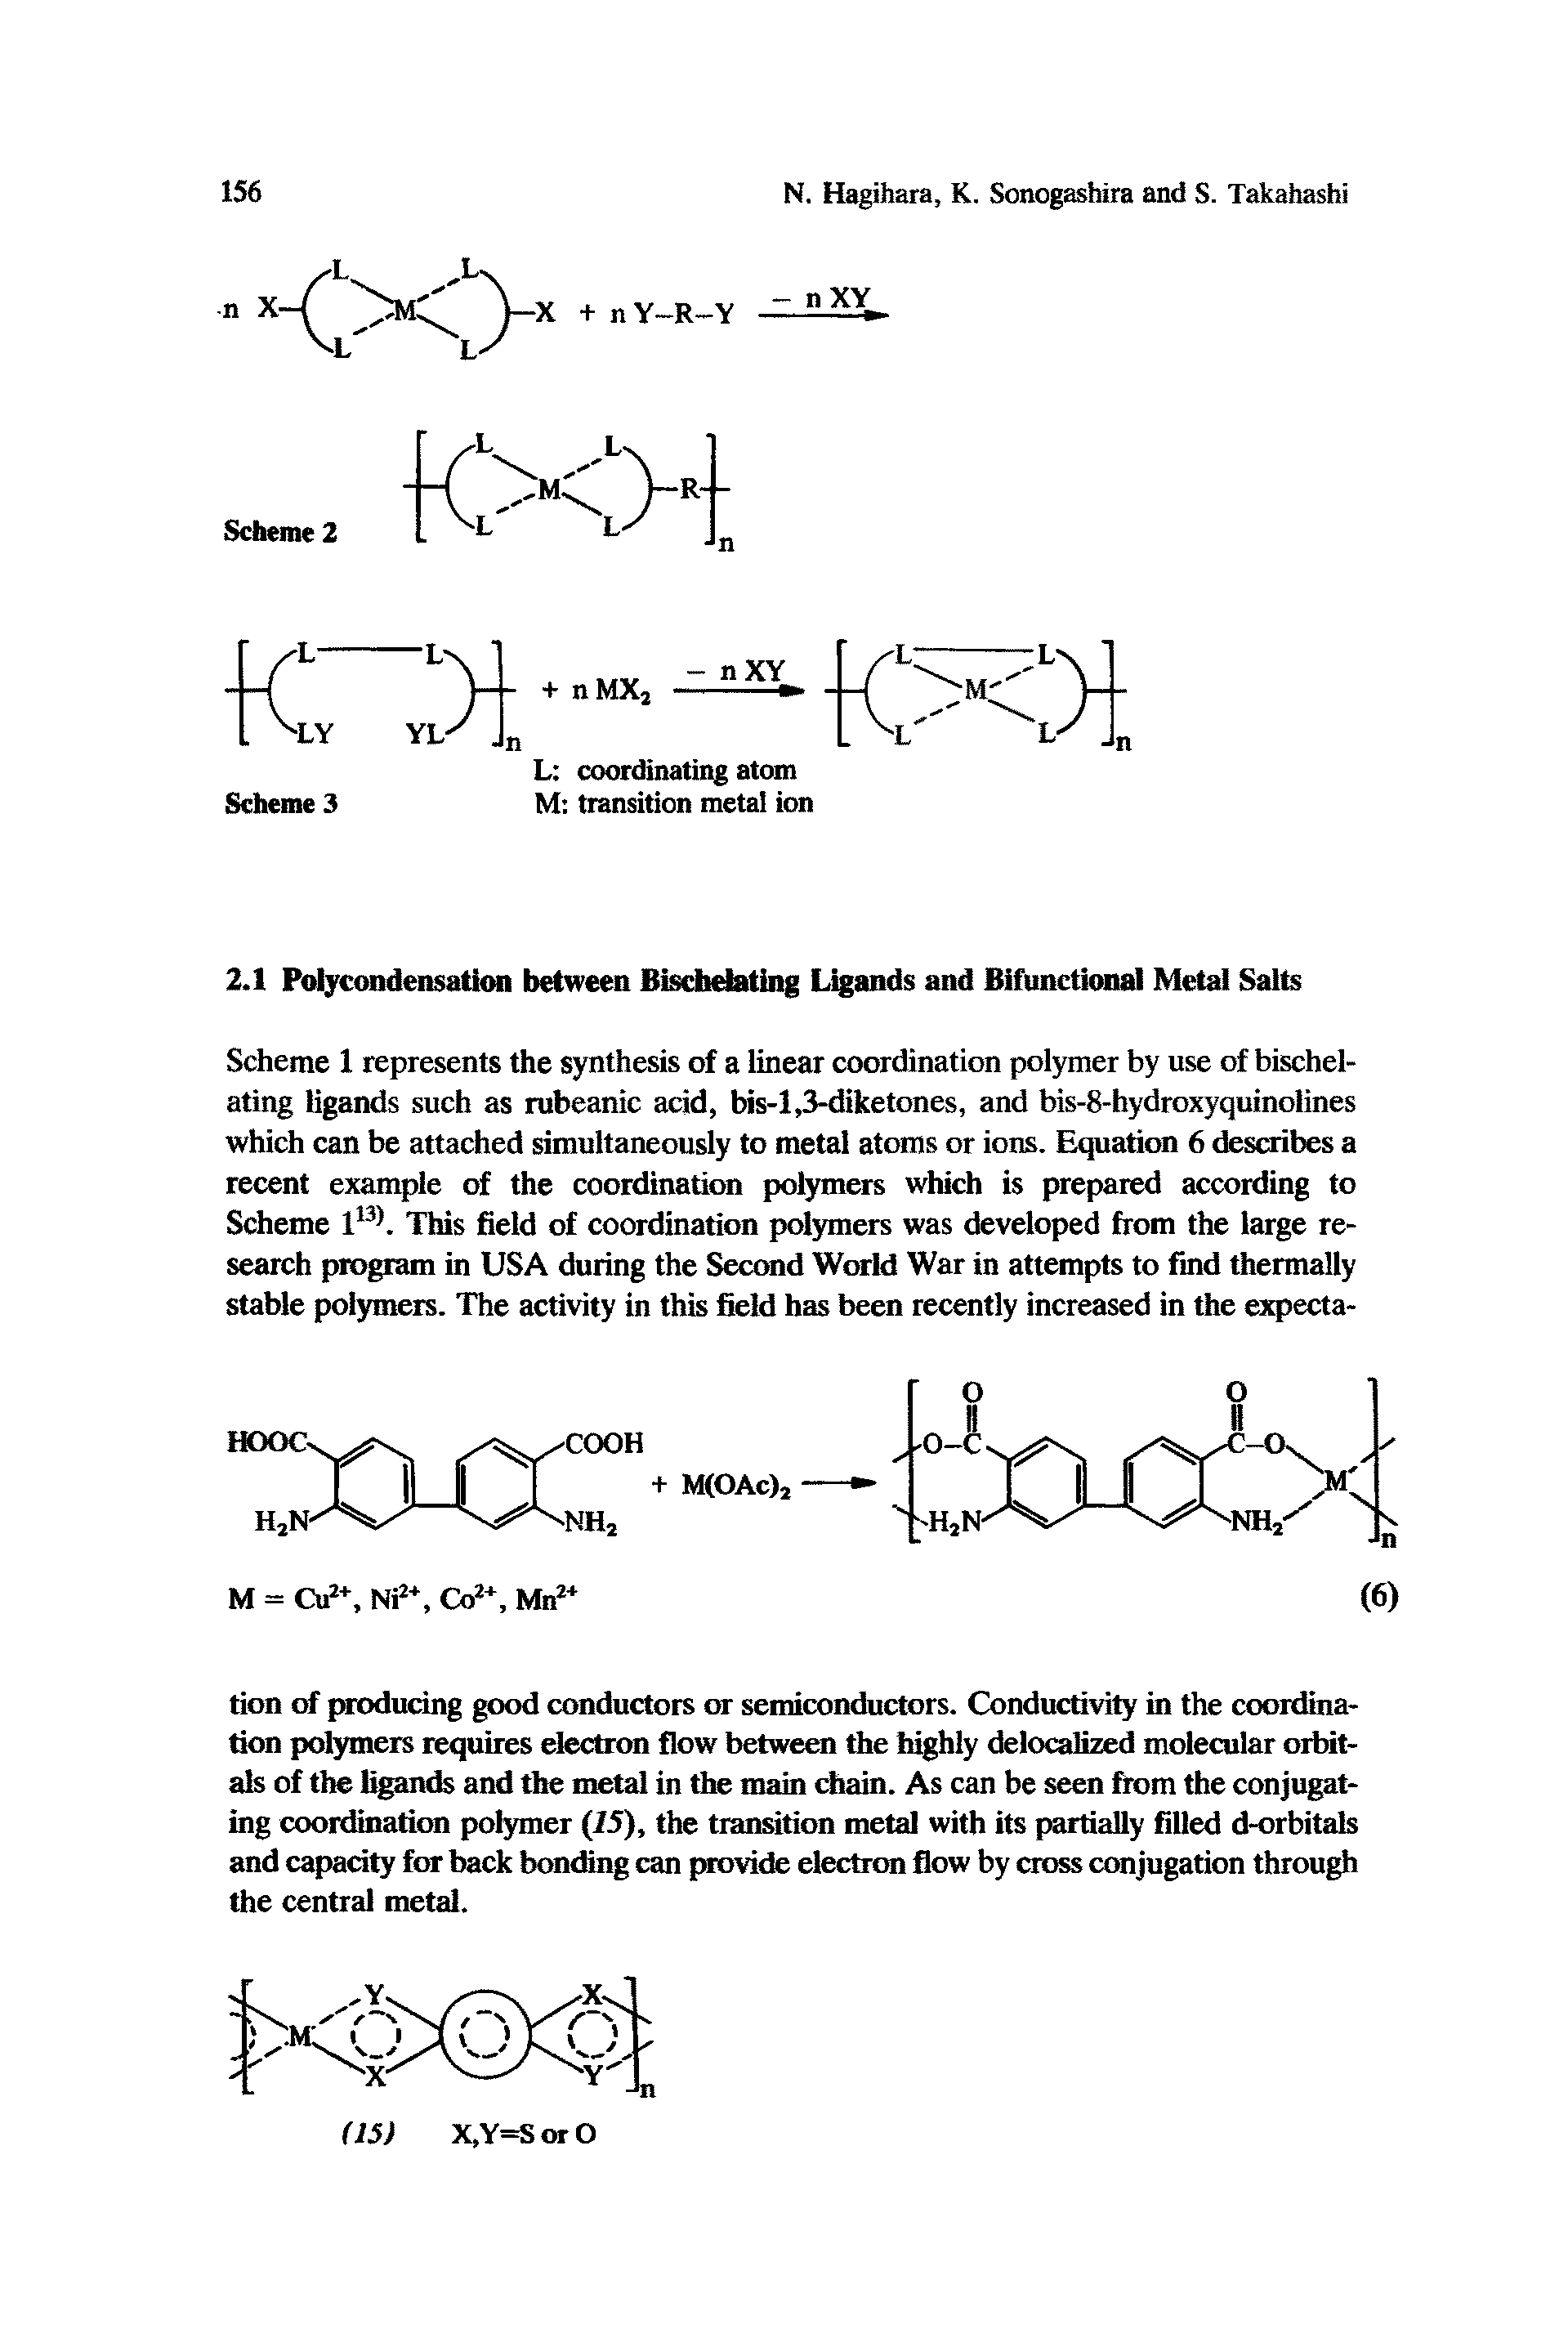 Scheme 1 represents the synthesis of a linear coordination polymer by use of bischeiating ligands such as rubeanic acid, bis-1,3-diketones, and bis-8-hydroxyquinolines which can be attached simultaneously to metal atoms or ions. Equation 6 describes a recent example of the coordination polymers which is prepared according to Scheme 113). This field of coordination polymers was developed from the large research program in USA during the Second World War in attempts to find thermally stable polymers. The activity in this field has been recently increased in the expecta-...